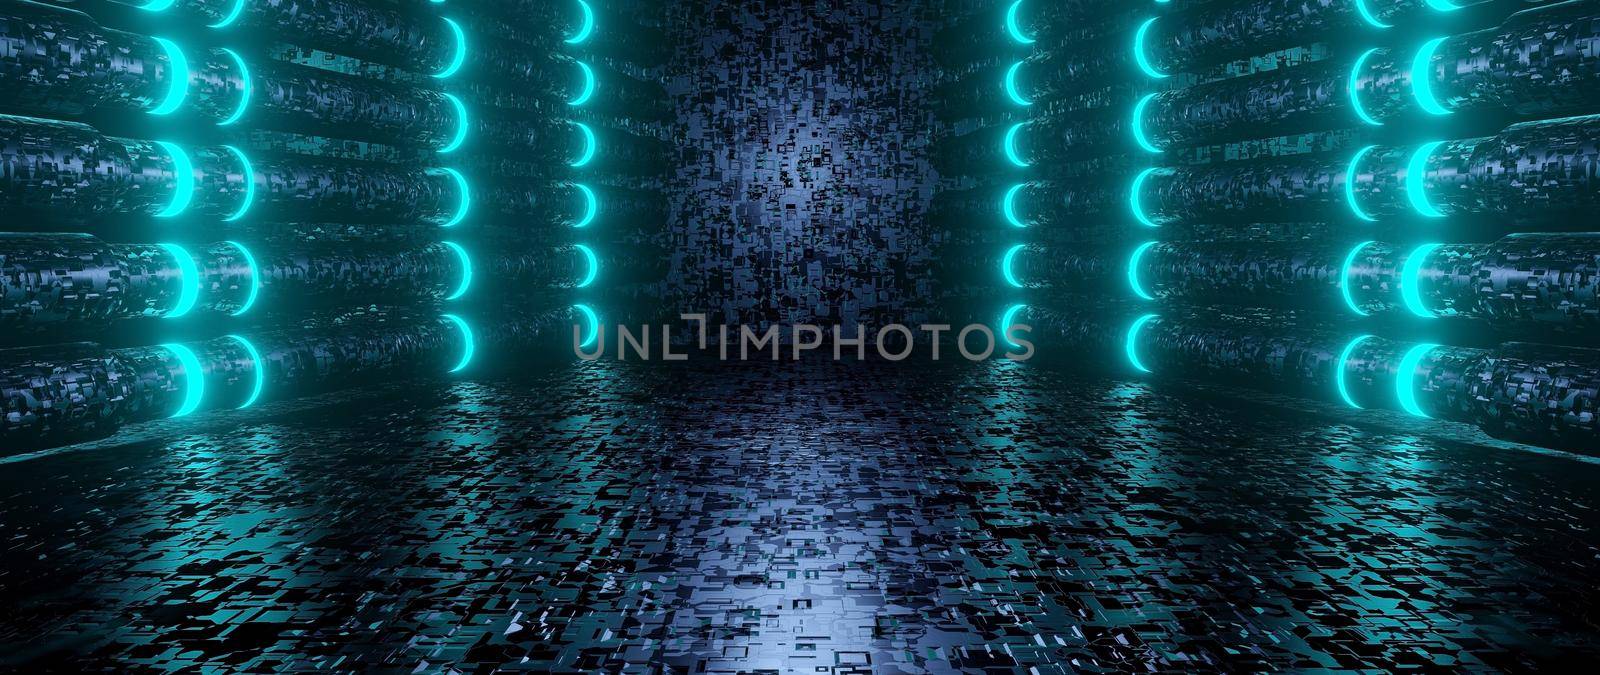 Empty Grunge Basement Underground Hall Light Blue Banner Background Alien Futuristic Concept For Product Backgrounds Presentation 3D Rendering by yay_lmrb